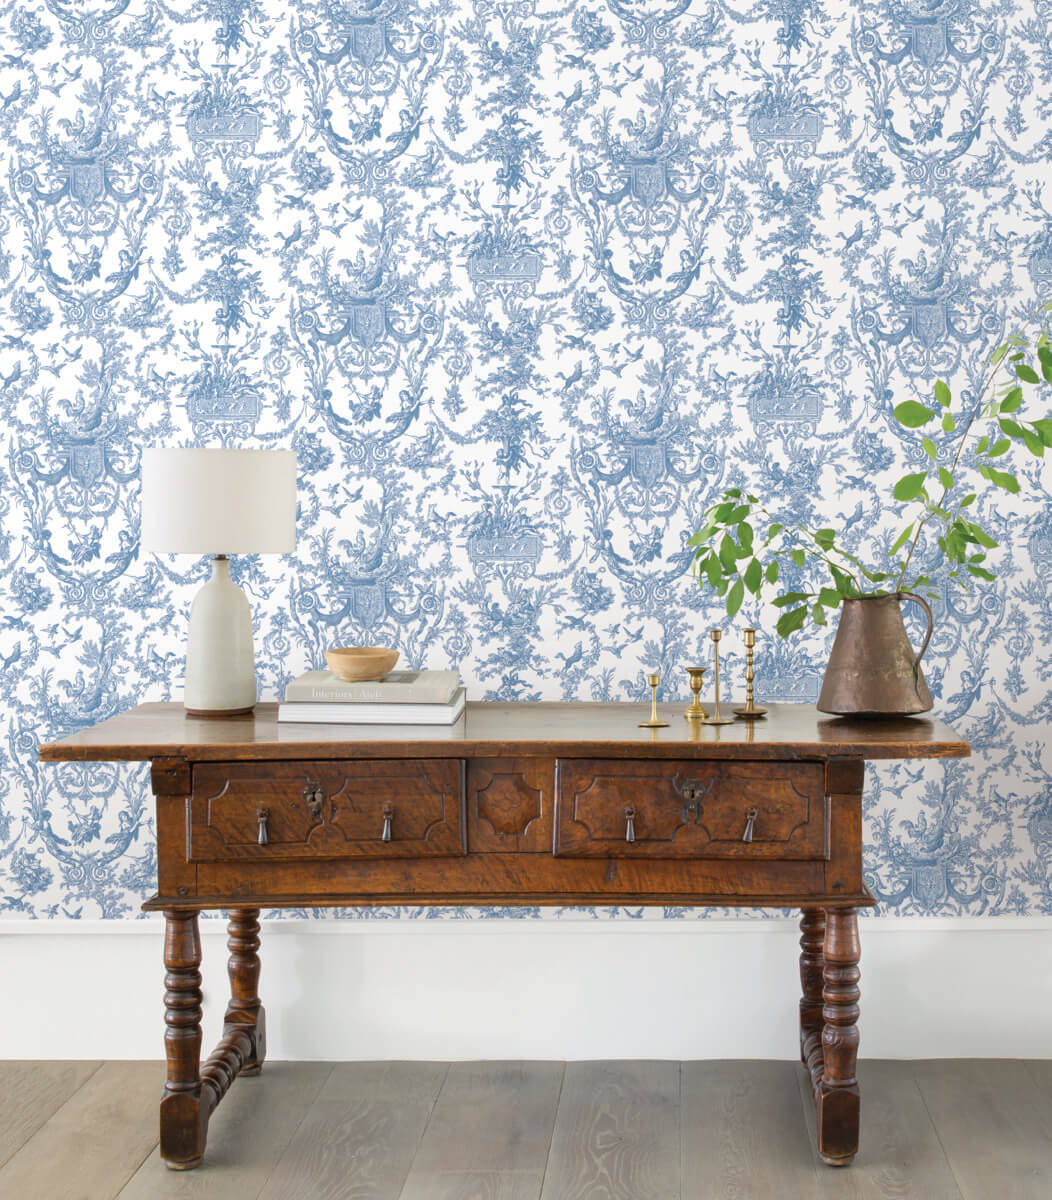 Toile Resource Library Old World Toile Wallpaper - Blue